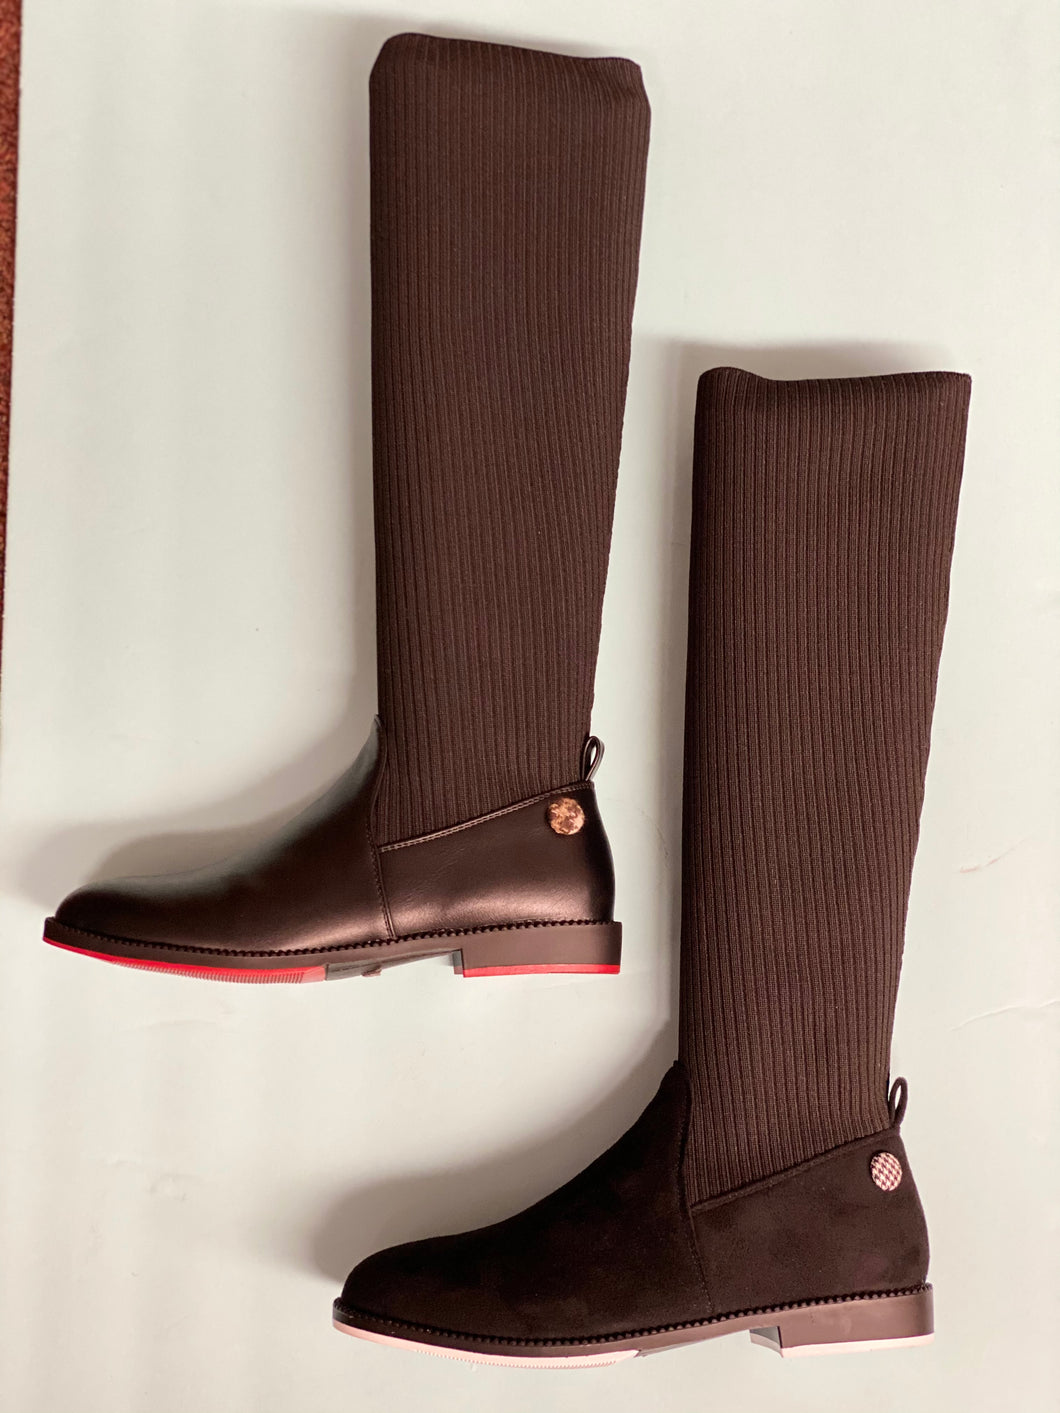 Lolit F1300-1 Sock Stretch Boot with Red Sole